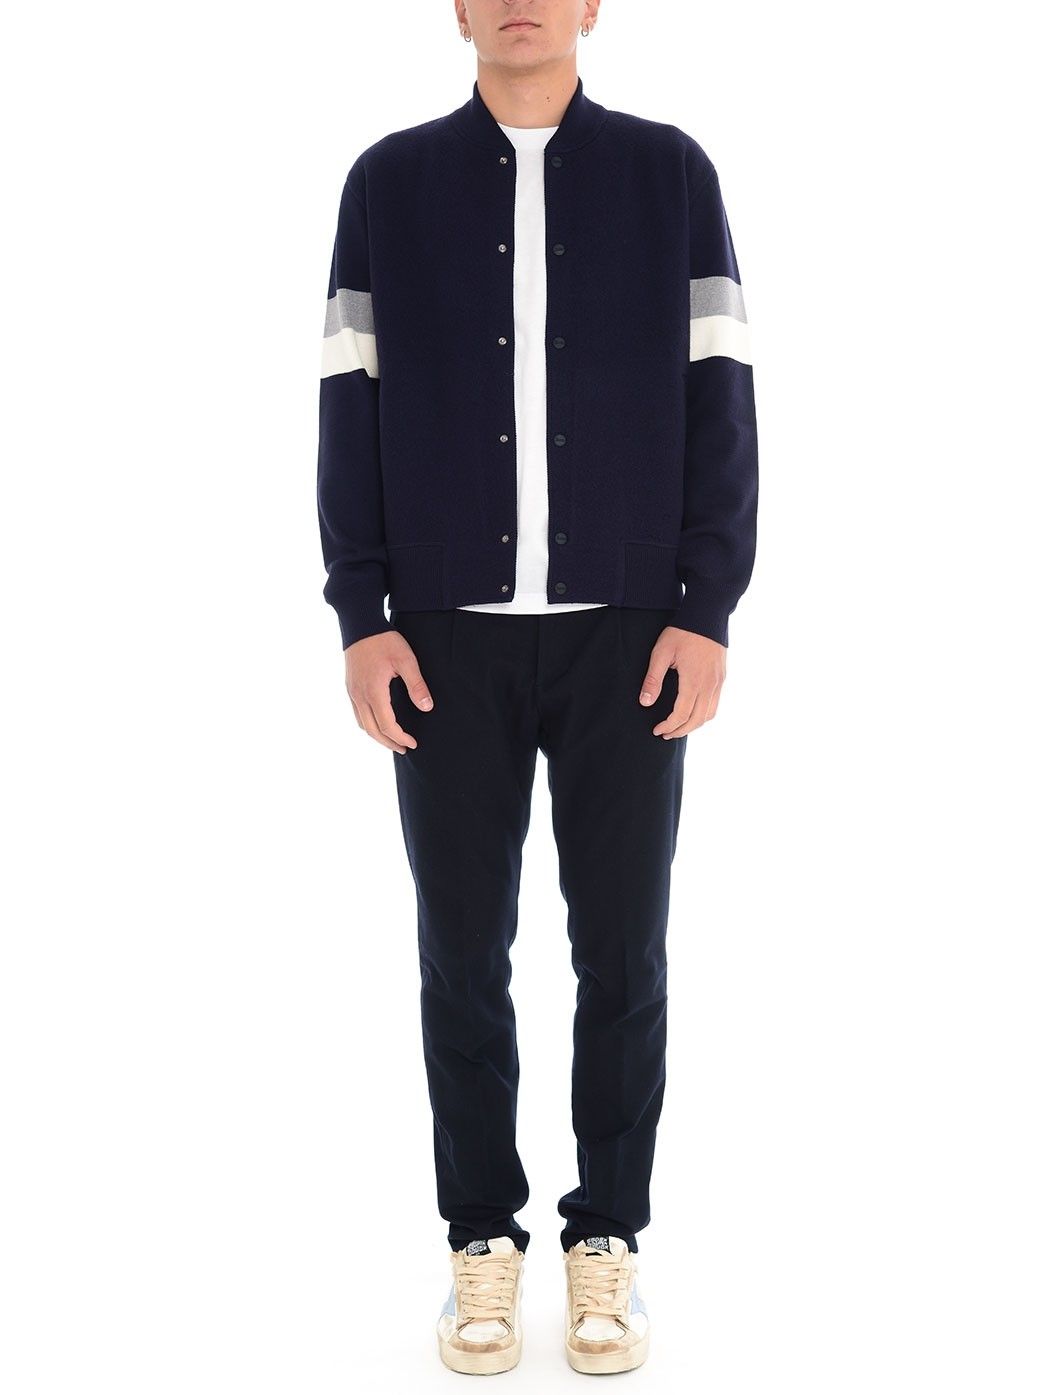  MAN COLLECTION,FALL WINTER,CHURCH'S,MONCLER,MONCLER GRENOBLE,HERNO,WOOLRICH,MSGM,NEIL BARRETT,STONE ISLAND,BLUNDSTONE  HERNO MC00013UR-70097